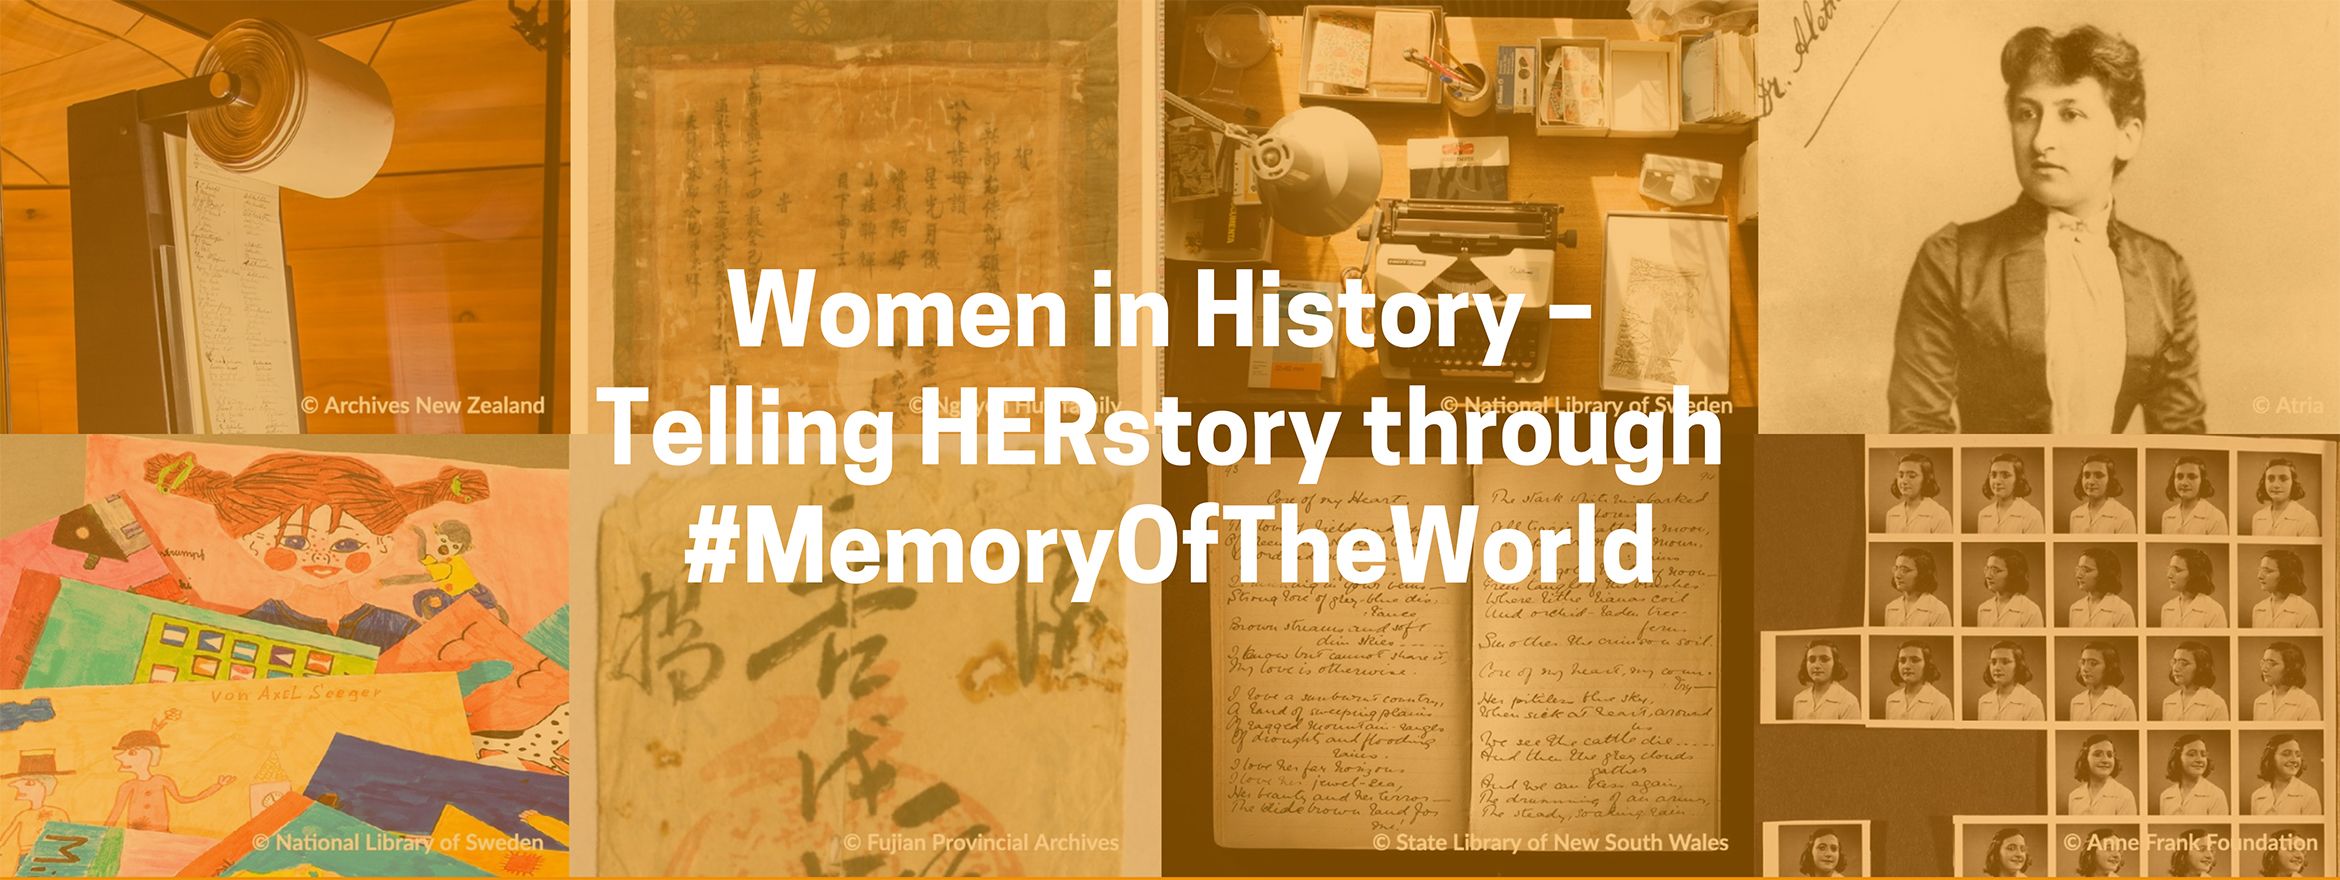 ‘Women in History’ online exhibition pays tribute to women’s achievements on International Women’s Day 2021